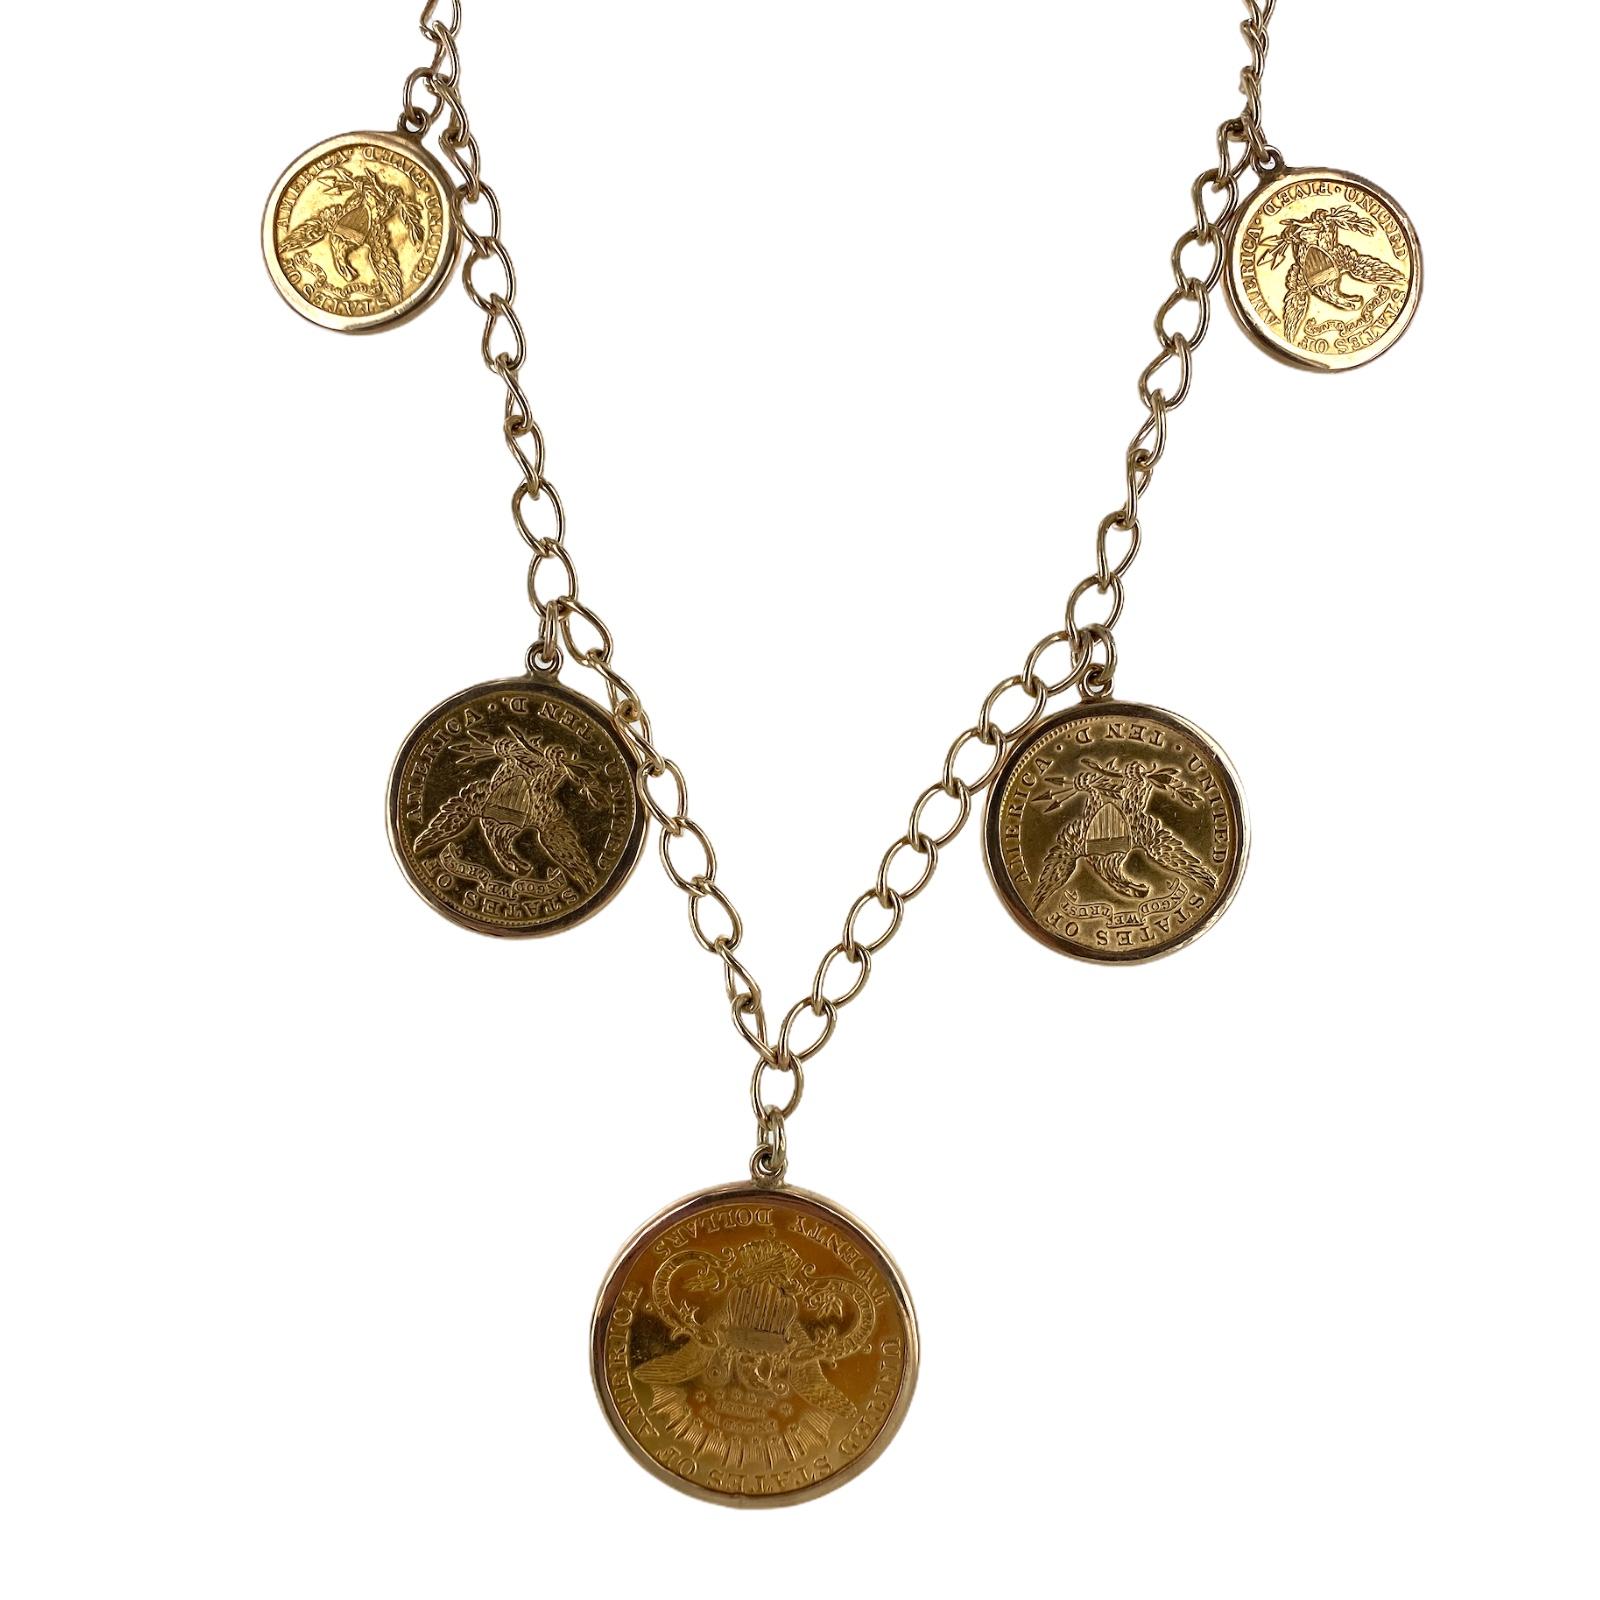 1901 gold coin necklace